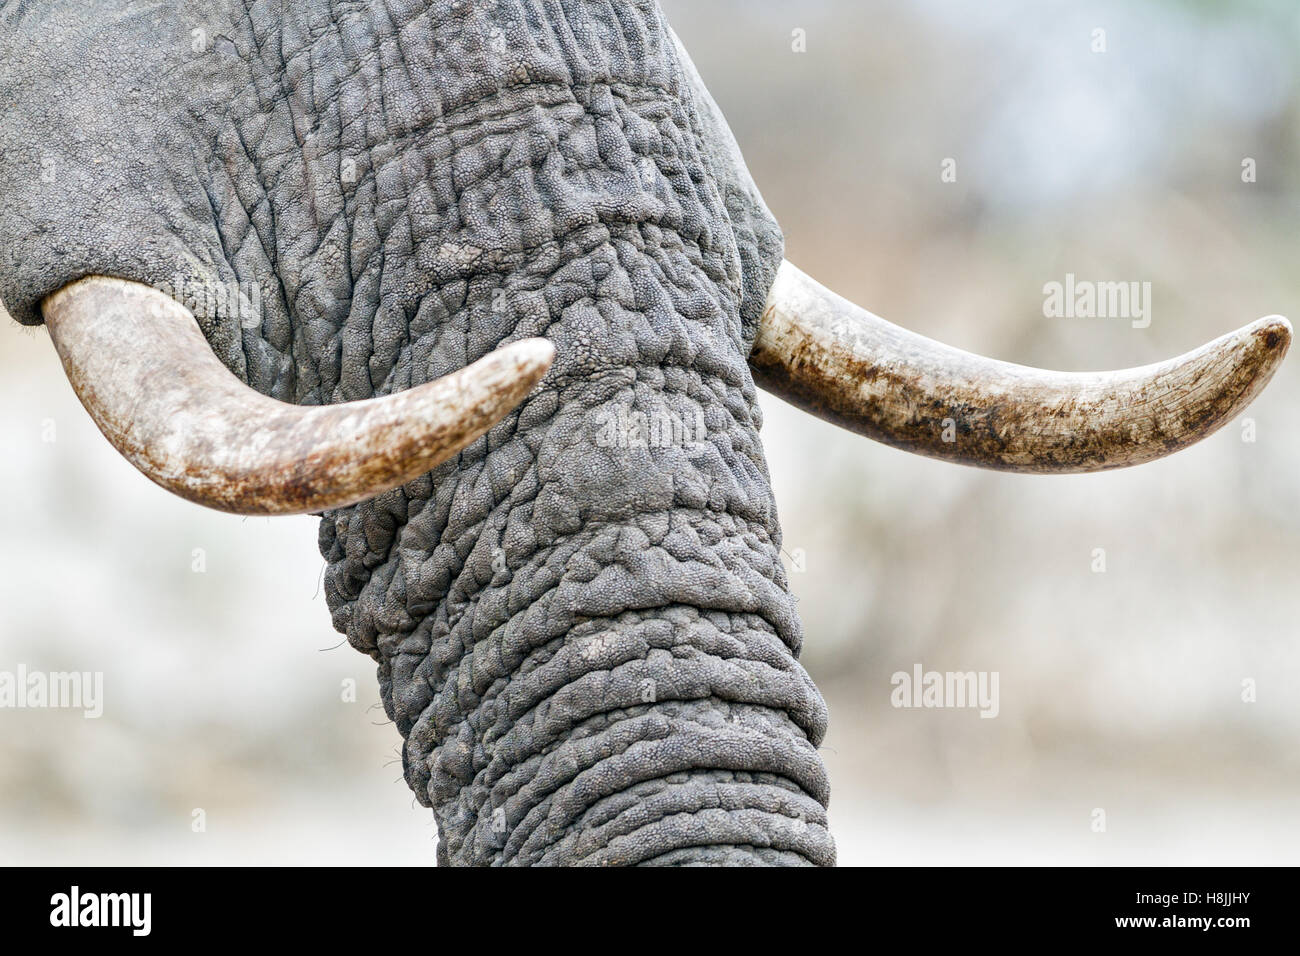 Part of a series of images documenting the complex social interactions of the African elephant when they gather to drink. Stock Photo